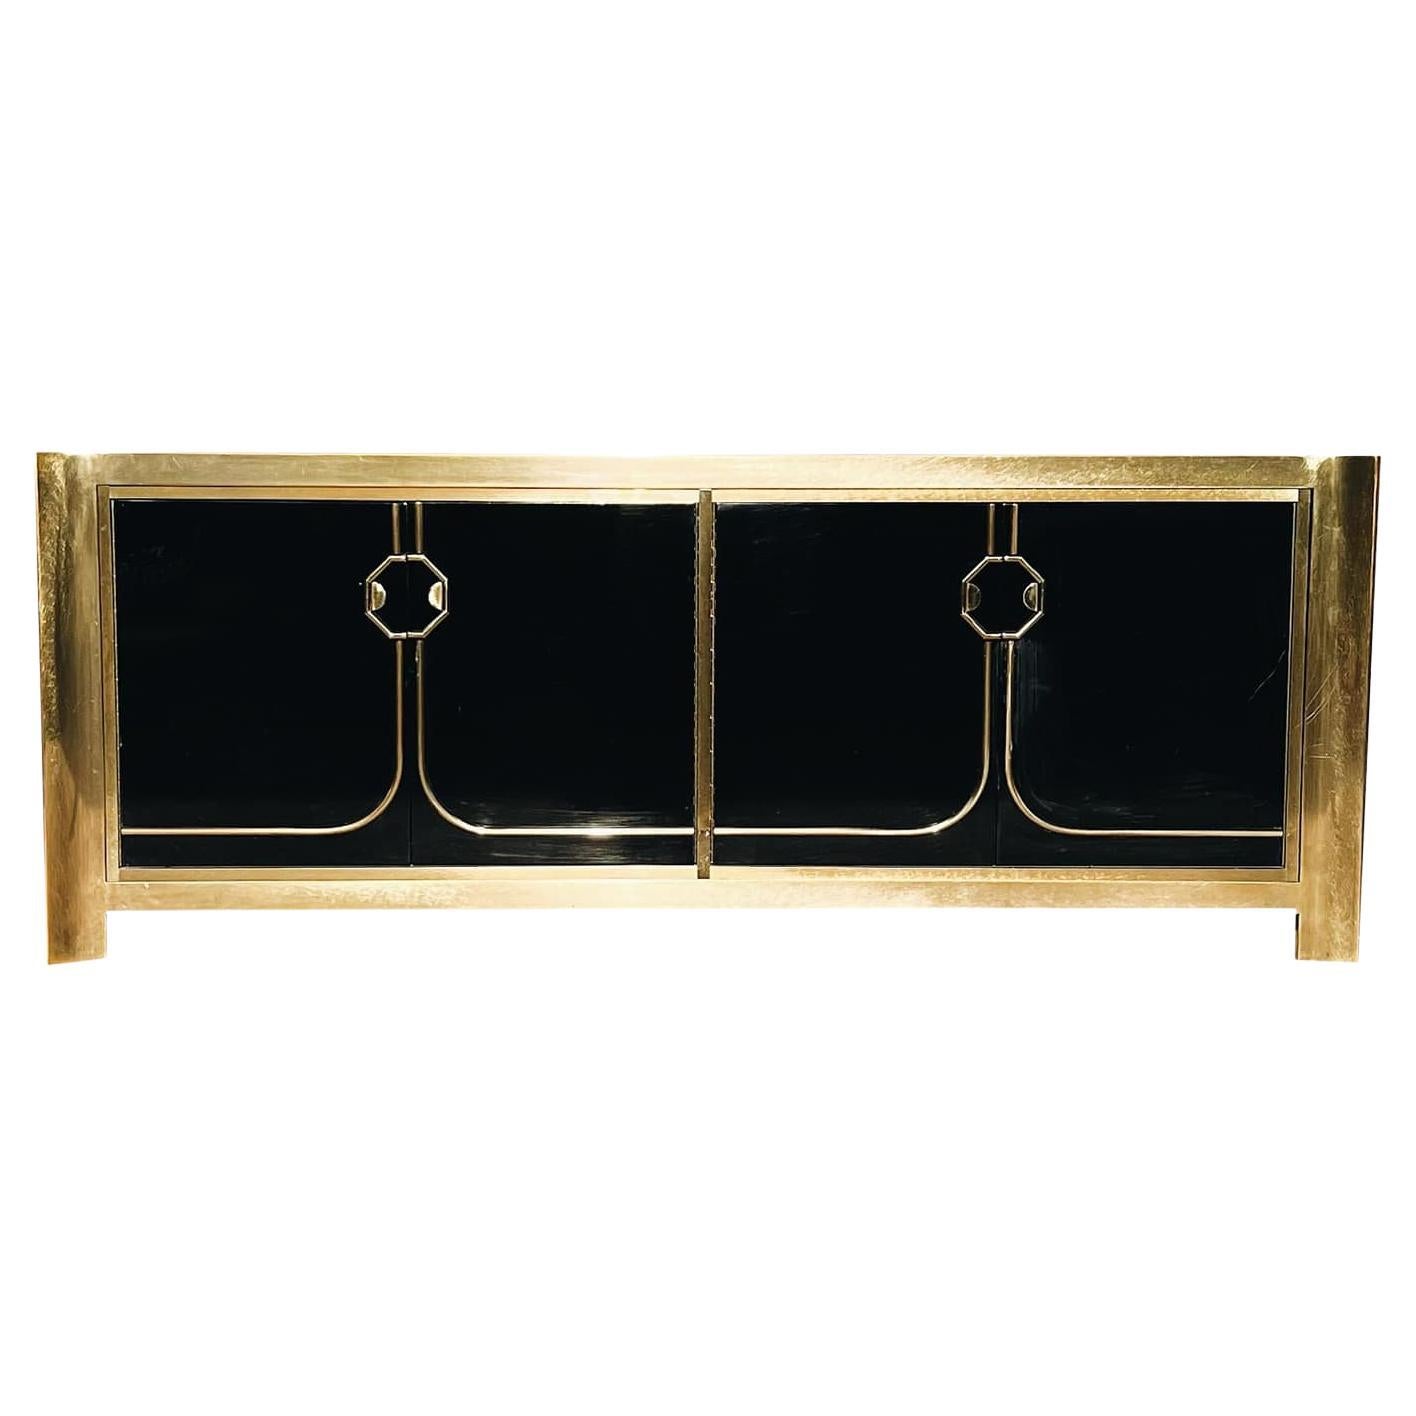 Vintage Mastercraft Brass and Black Lacquer Credenza